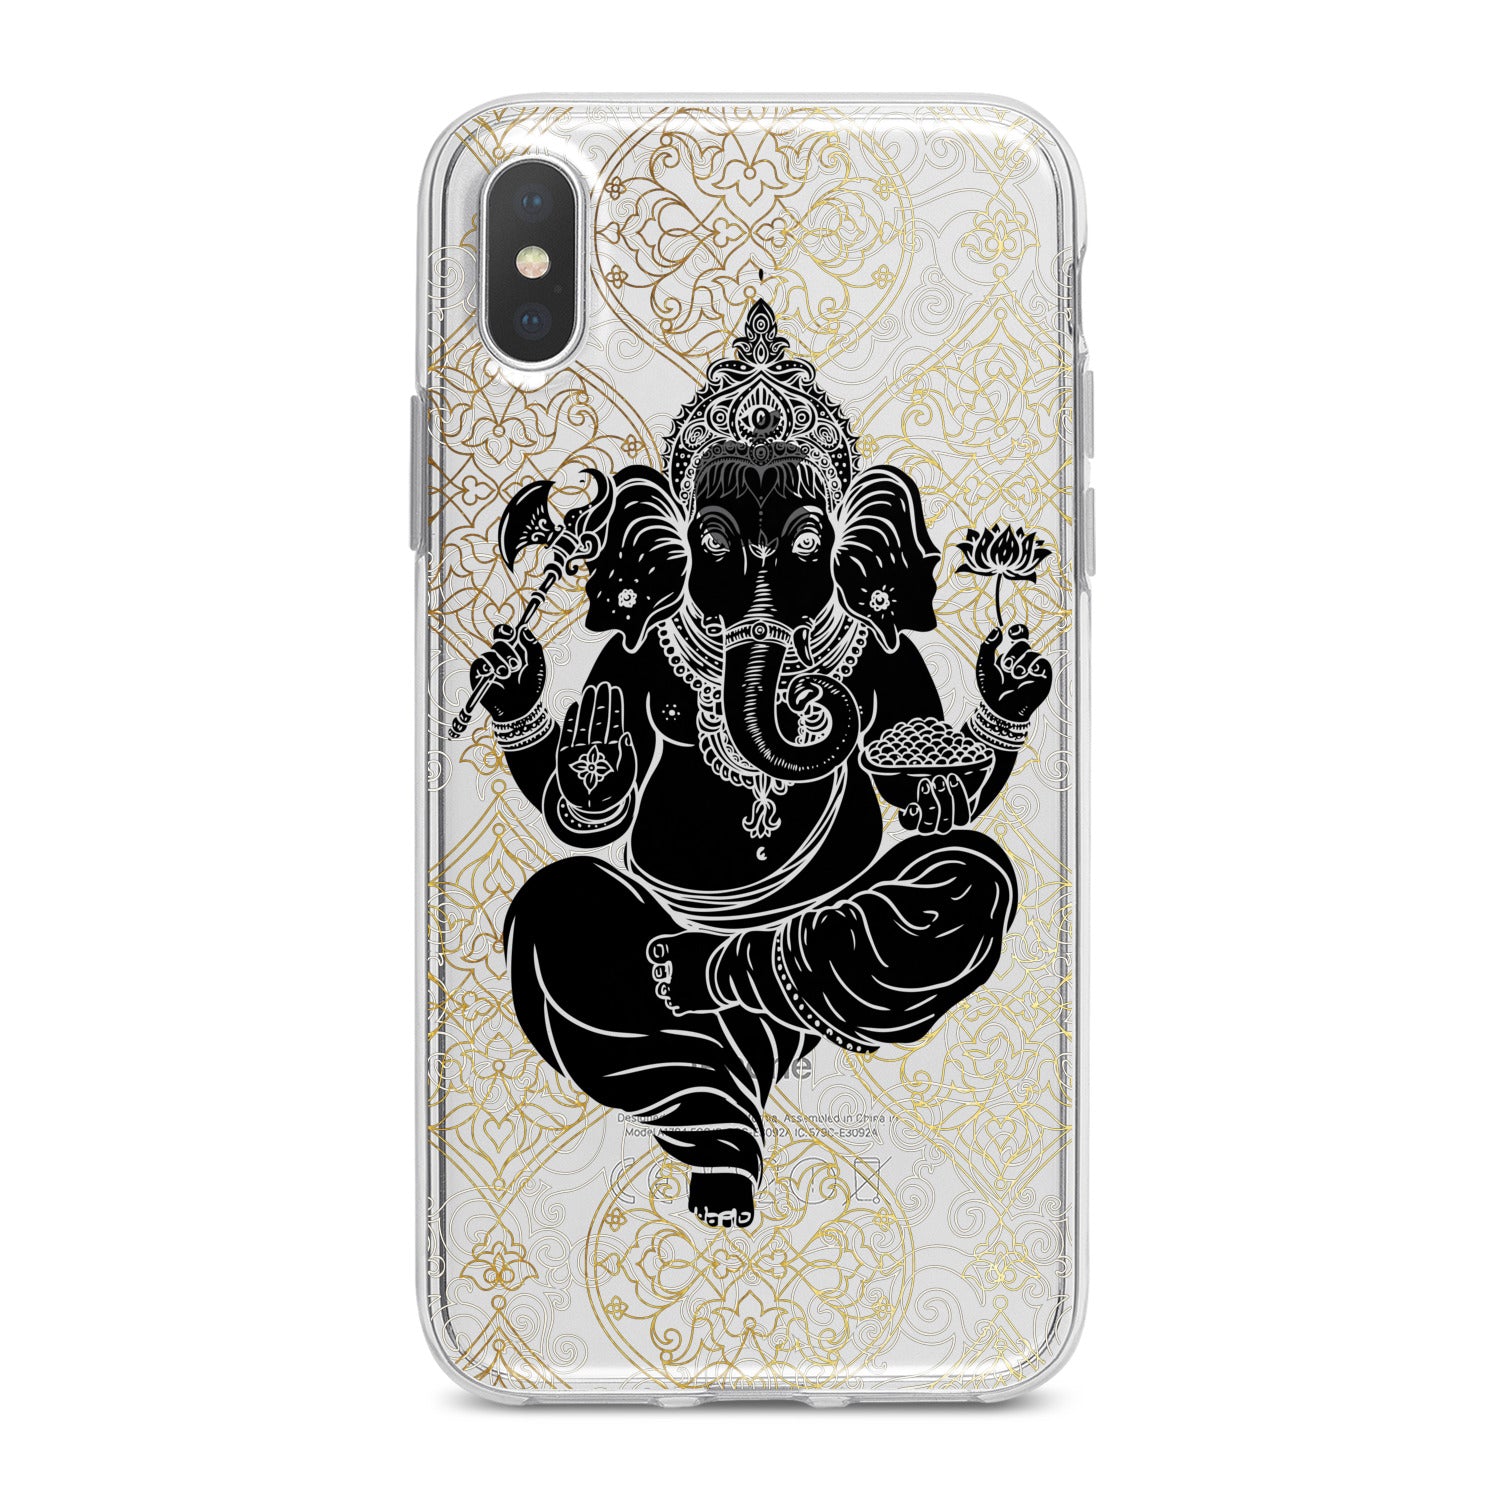 Lex Altern Black Ganesha Phone Case for your iPhone & Android phone.